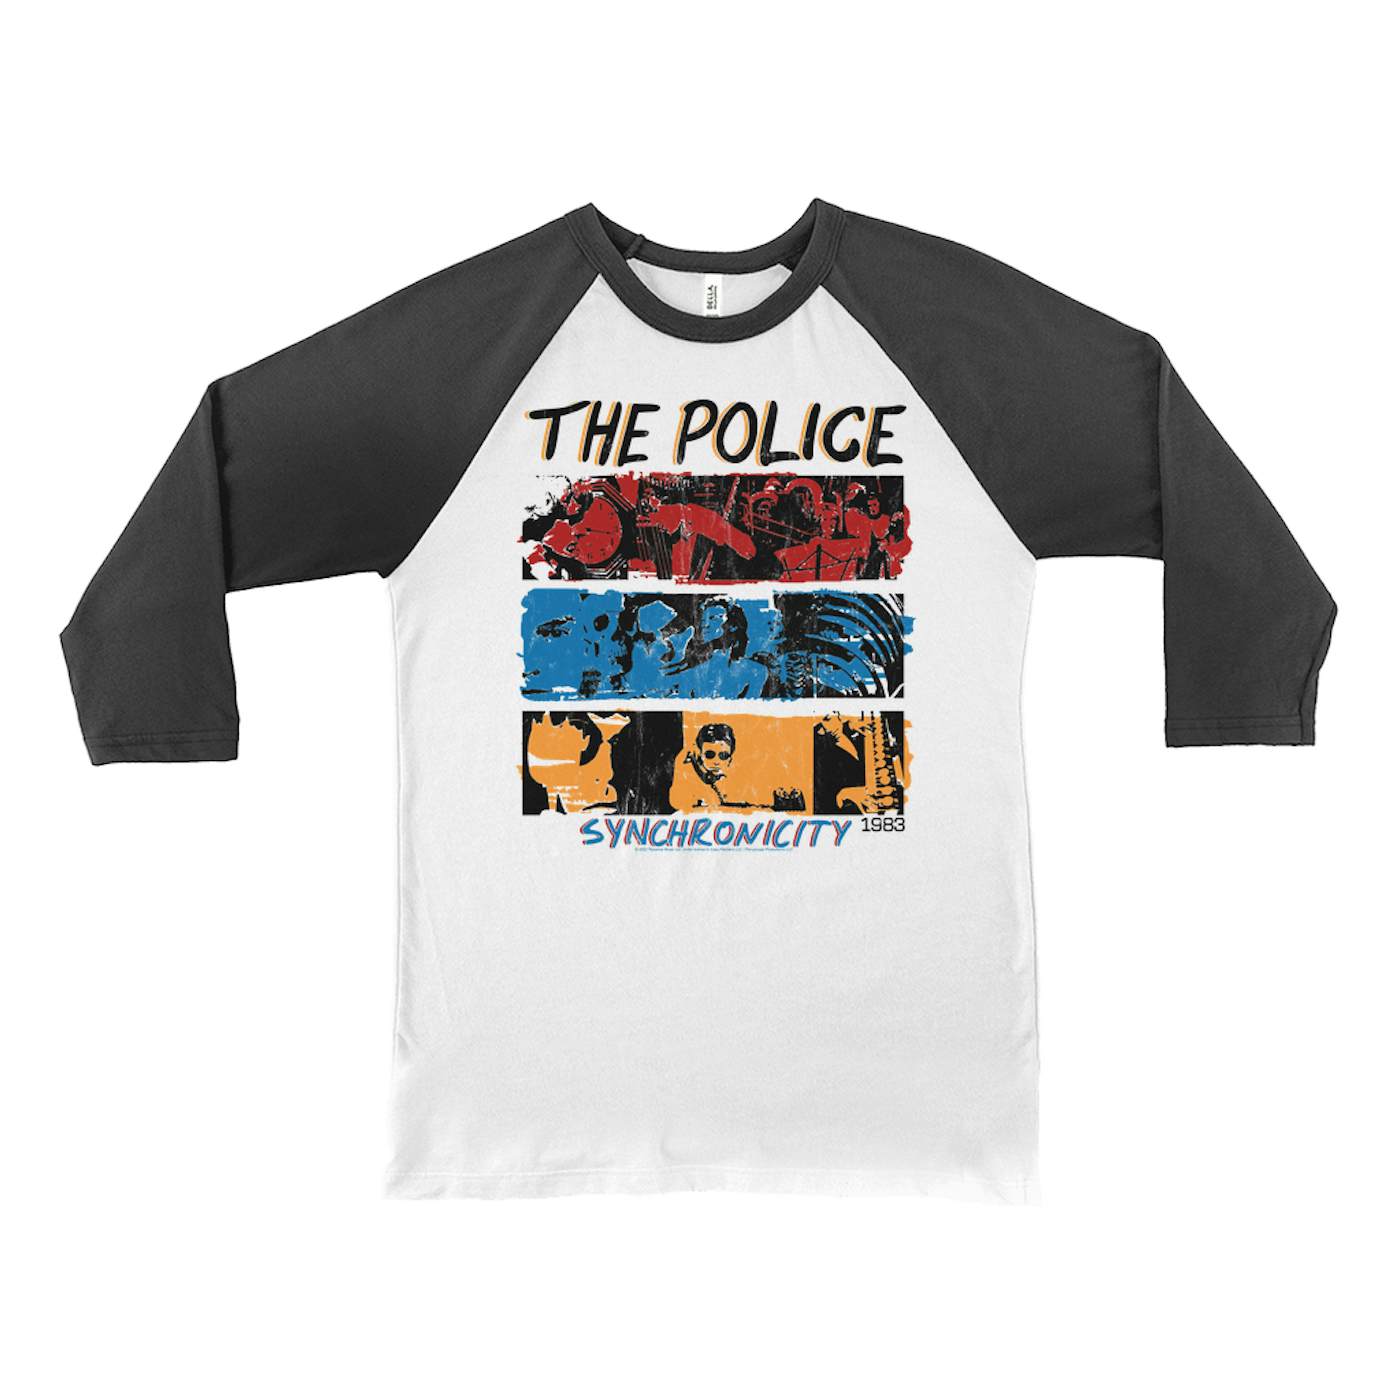 The Police 3/4 Sleeve Baseball Tee | 1983 Synchronicity Tour Distressed (Merchbar Exclusive) The Police Shirt